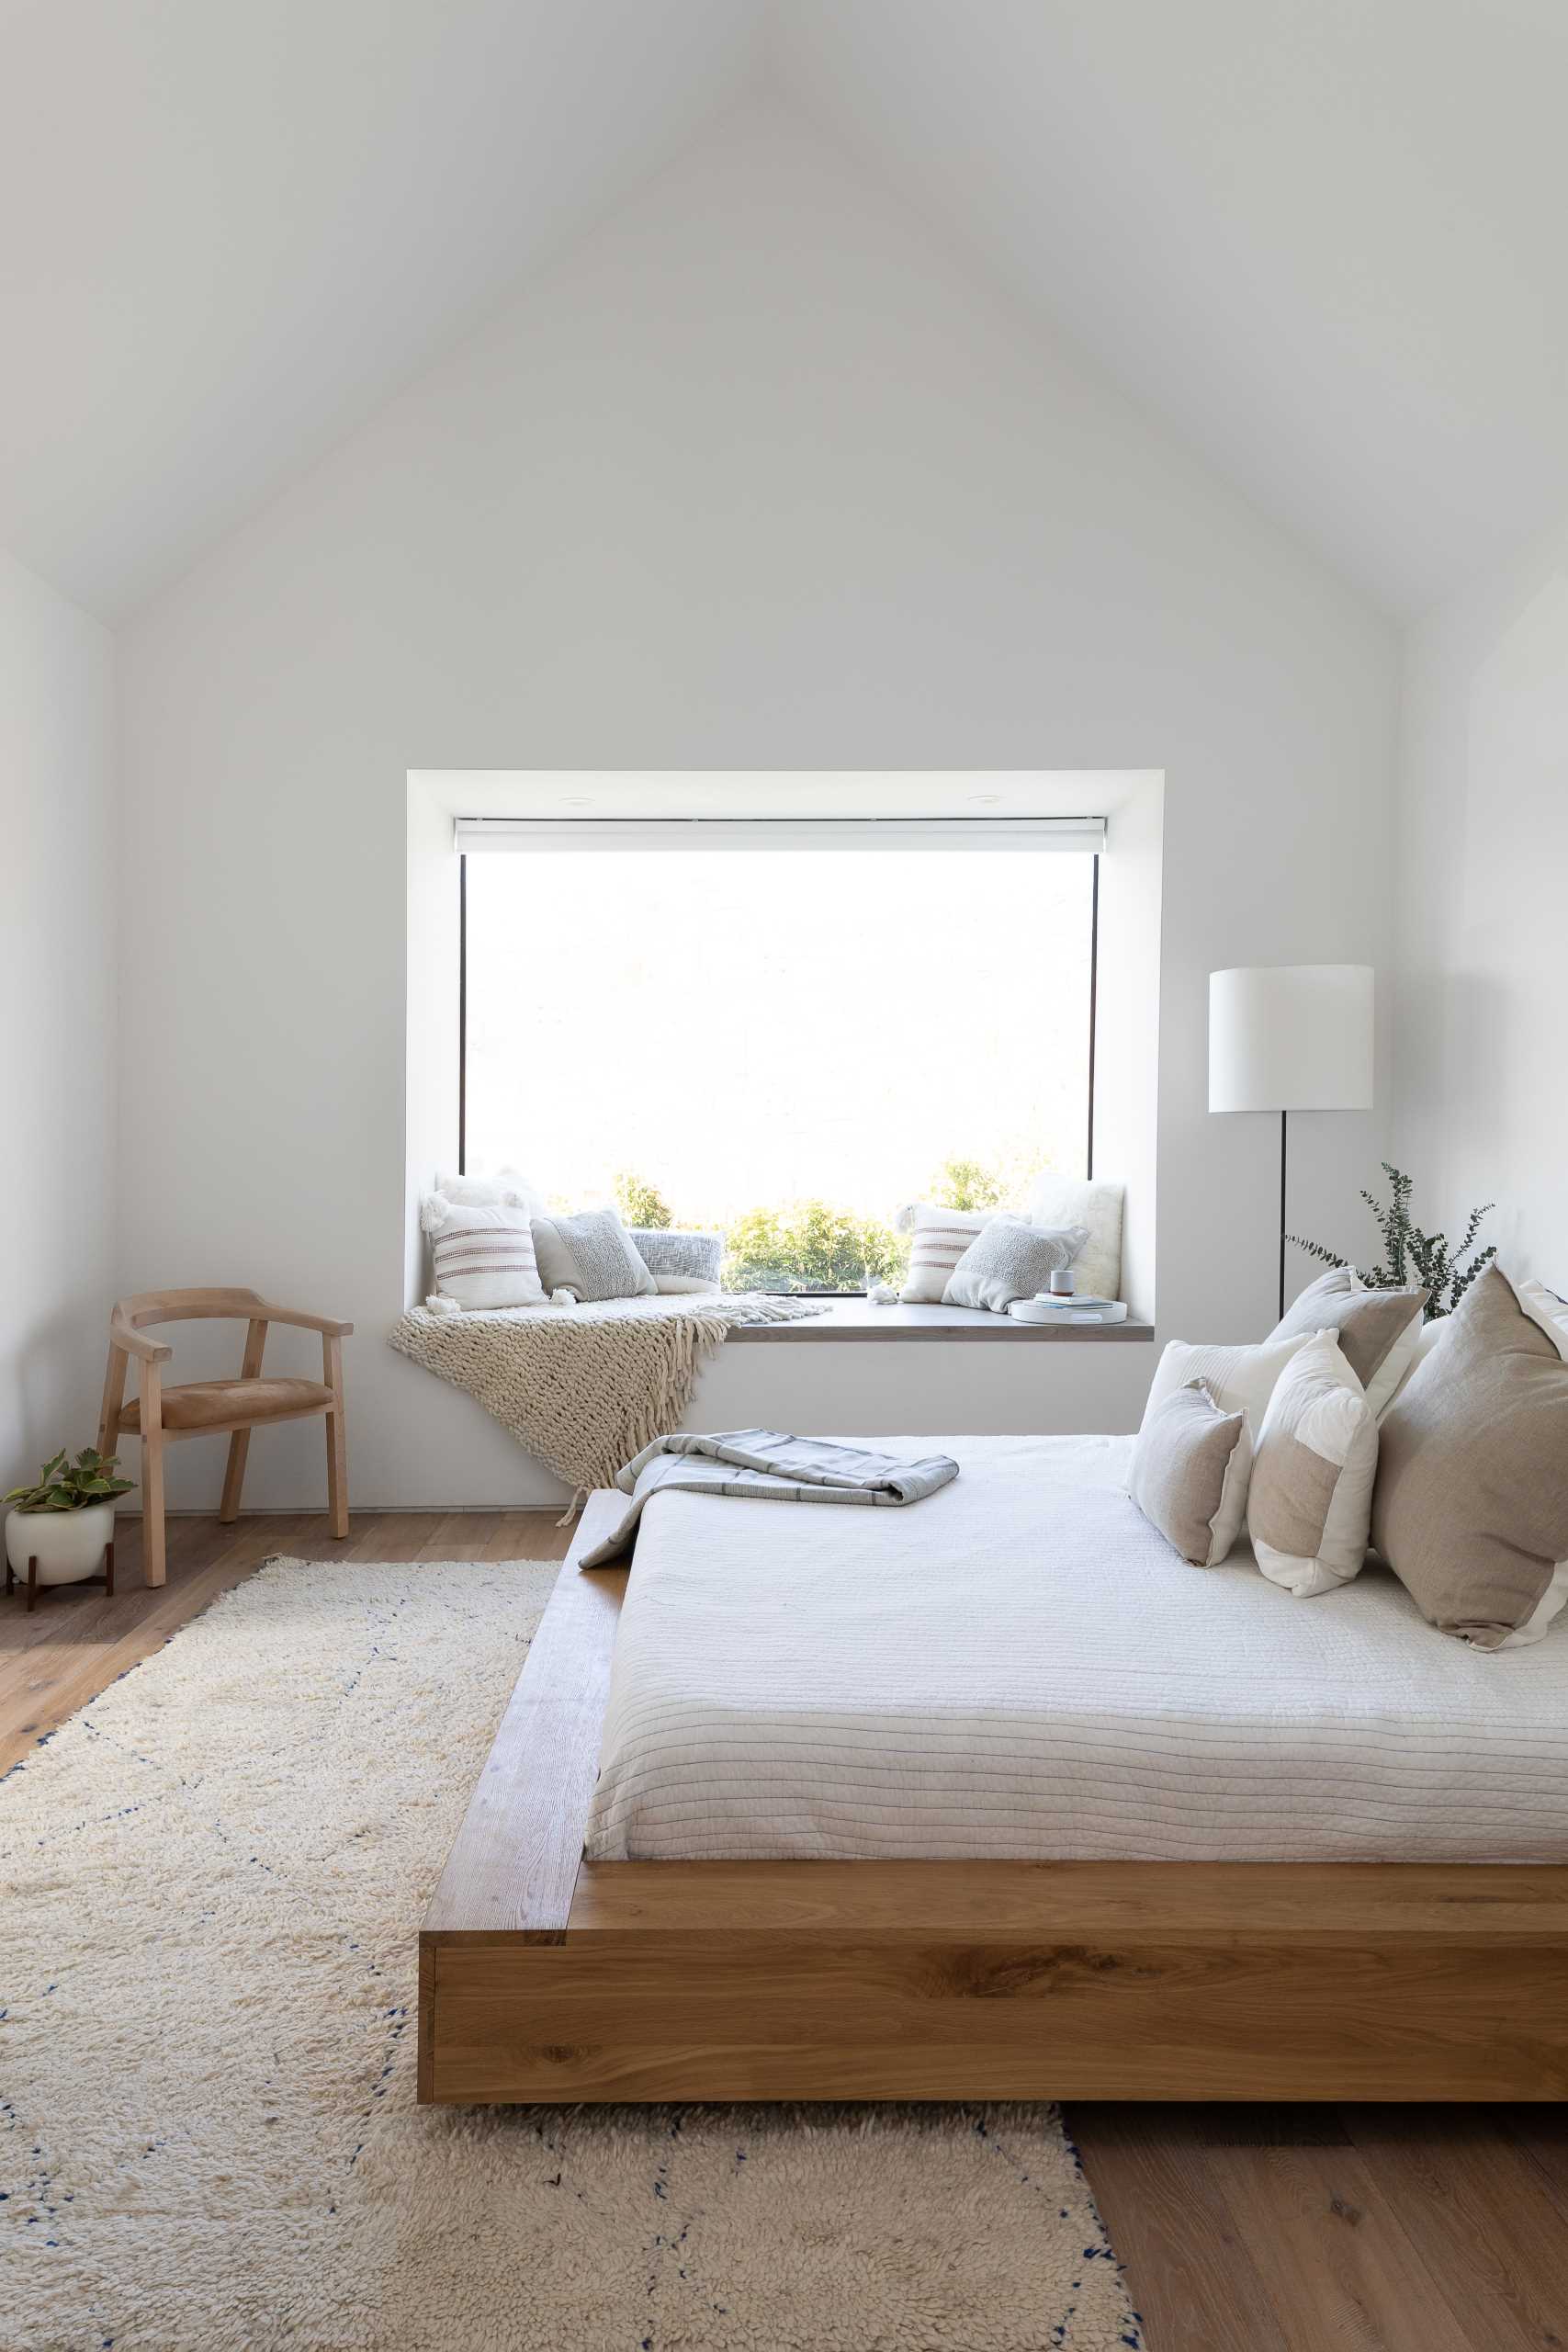 In this modern primary bedroom, the vaulted ceiling makes the room feel large, while a window seat creates a cozy place to relax.